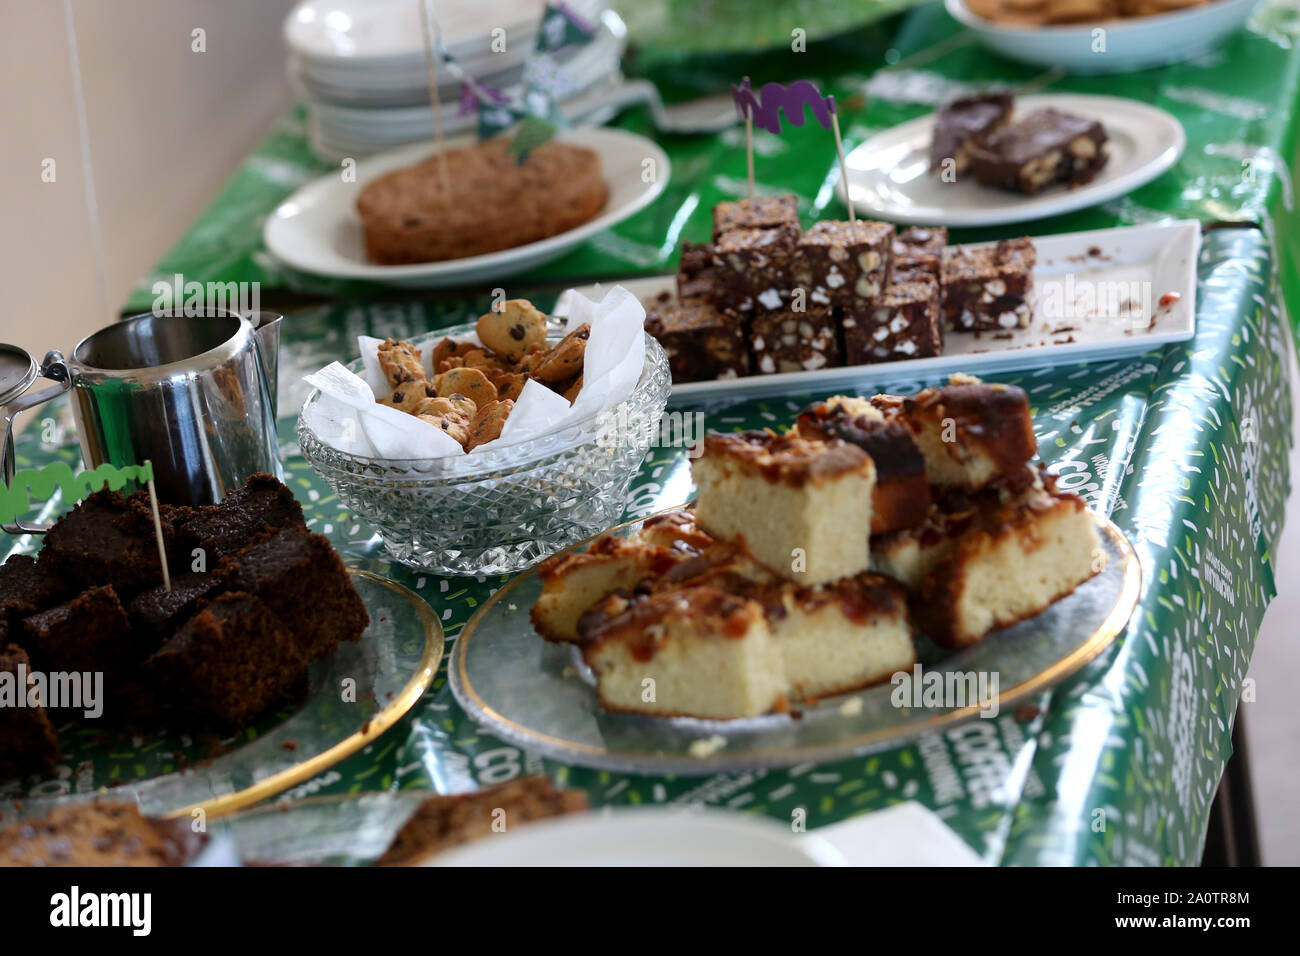 Macmillan Cancer Support tea party pictured in Bognor Regis, West Sussex, UK. Stock Photo